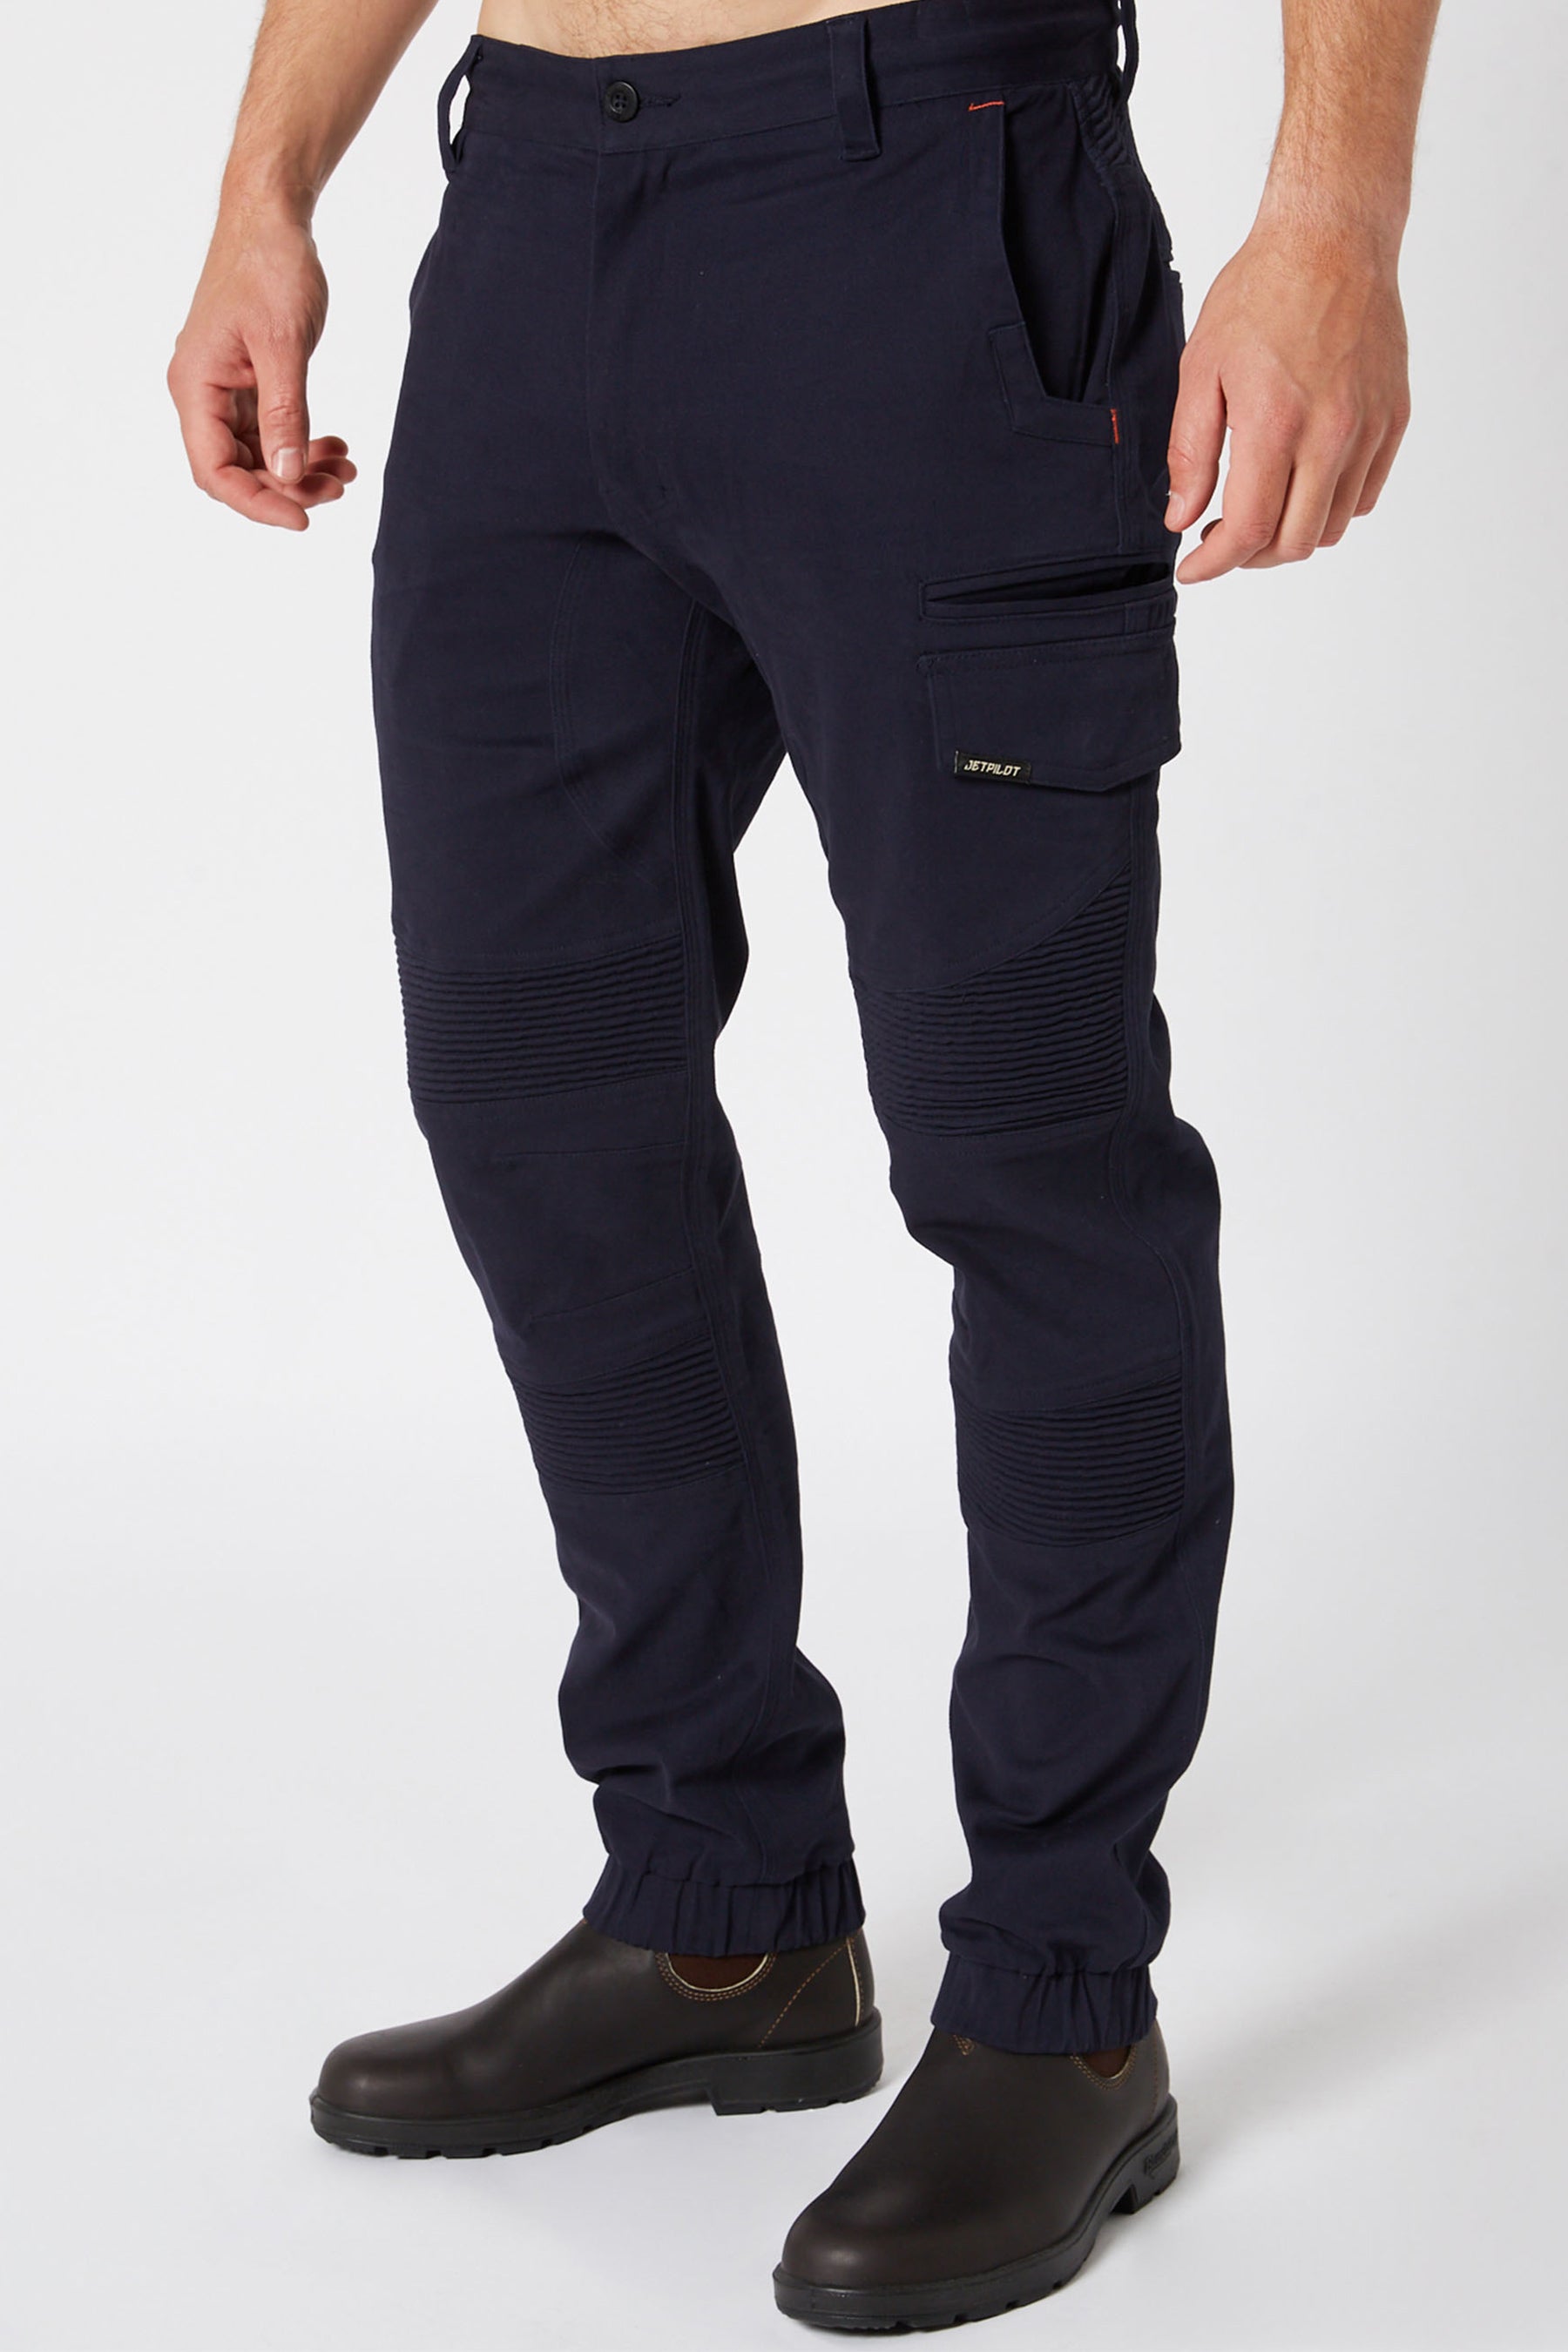 JP Fueled Corrugated Stretch Pant - Ink